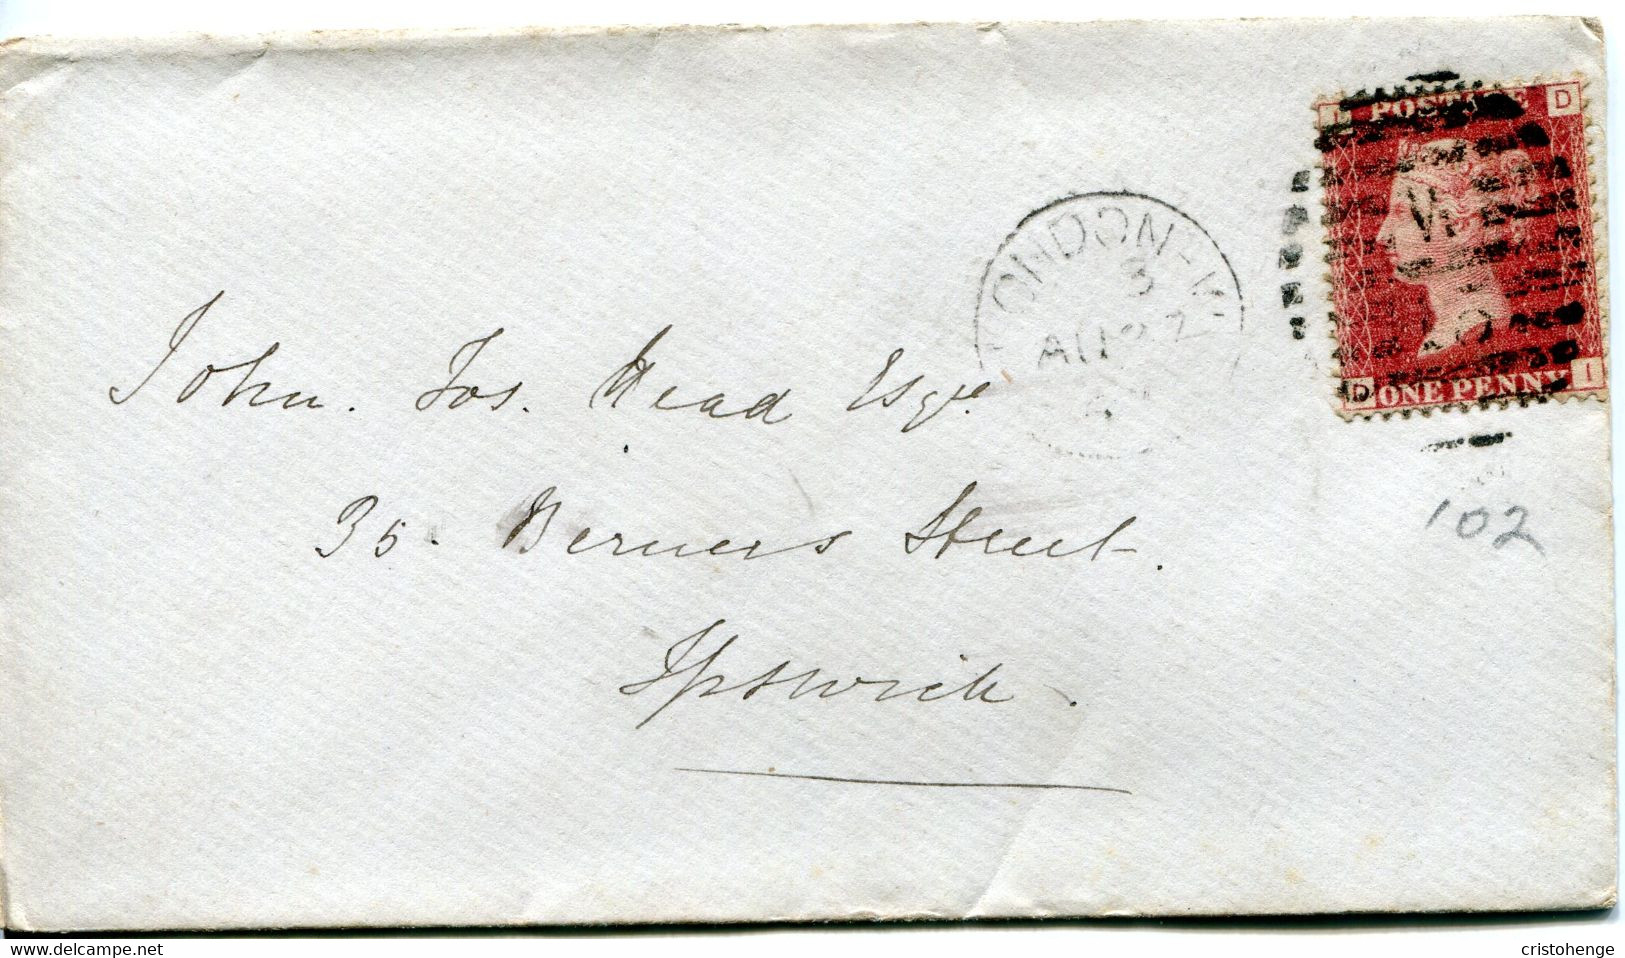 Great Britain - England 1867 Cover London To Ipswich - 1d Red - Plate 102 - Covers & Documents